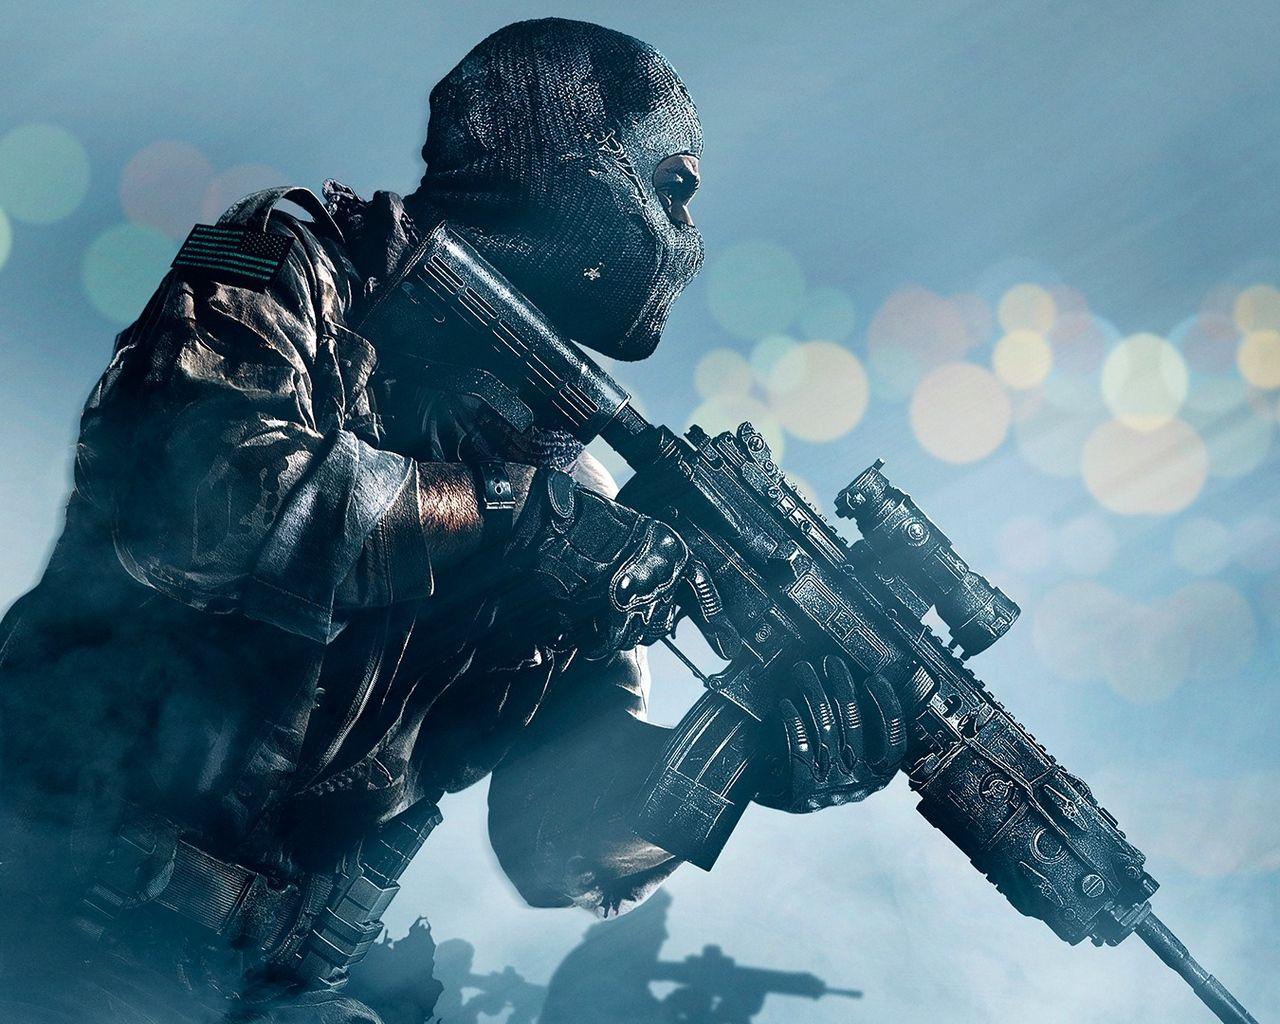 Download wallpaper 1280x1024 call of duty ghosts, activision